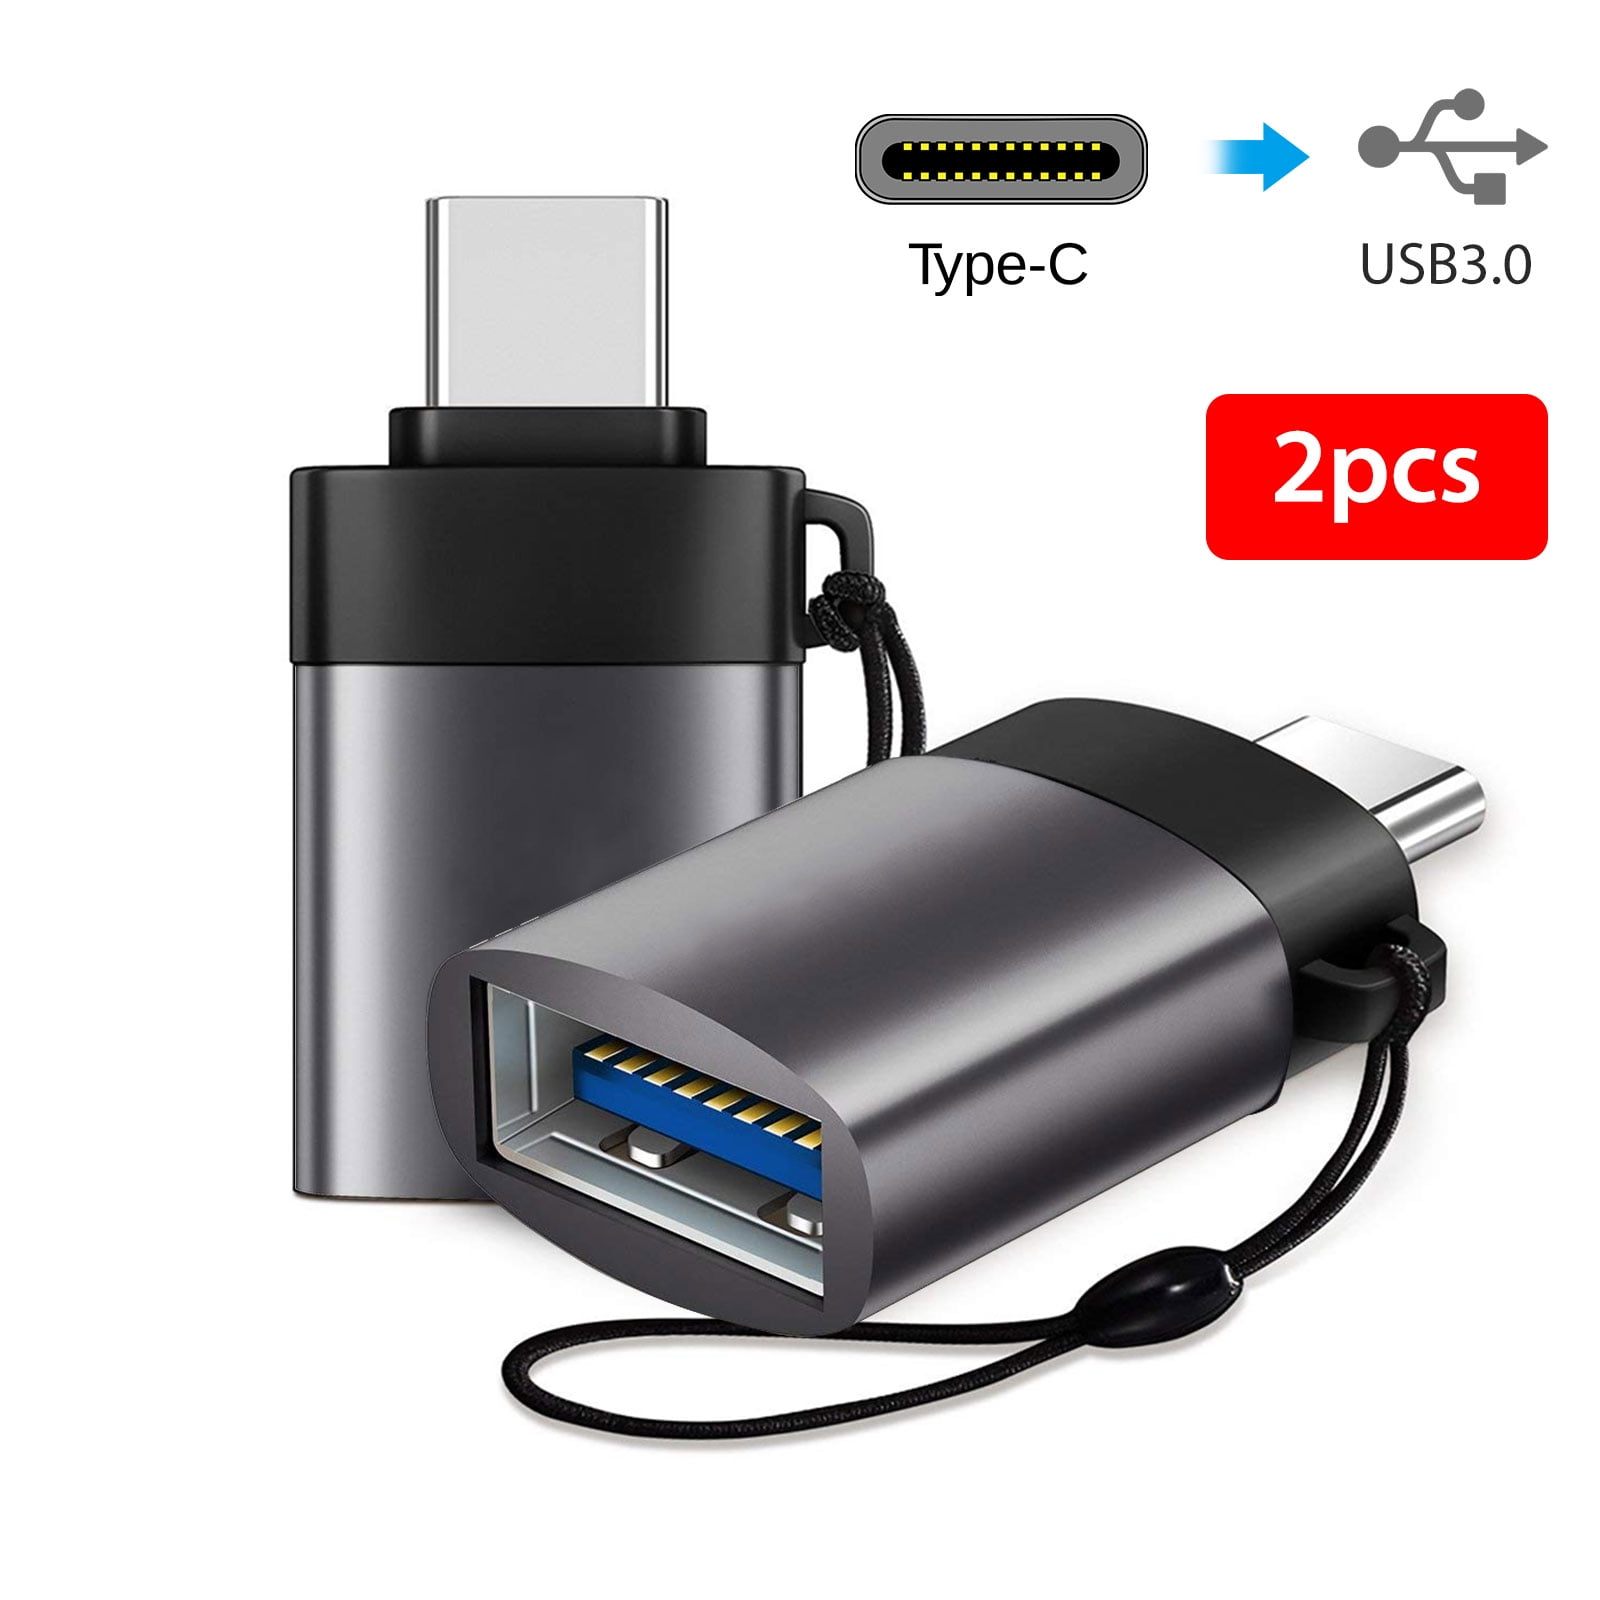 Big-E USB C OTG Adapter Thunderbolt 3 to USB 3.0 A Female On The Go Cable Connector for Samsung Galaxy S22/S21/S21+/5G/S20/S10/S9/,MacBook Pro/Air 2020 iPad Pro 2020,LG V40 V30 G6 Google Pixel 2 XL 